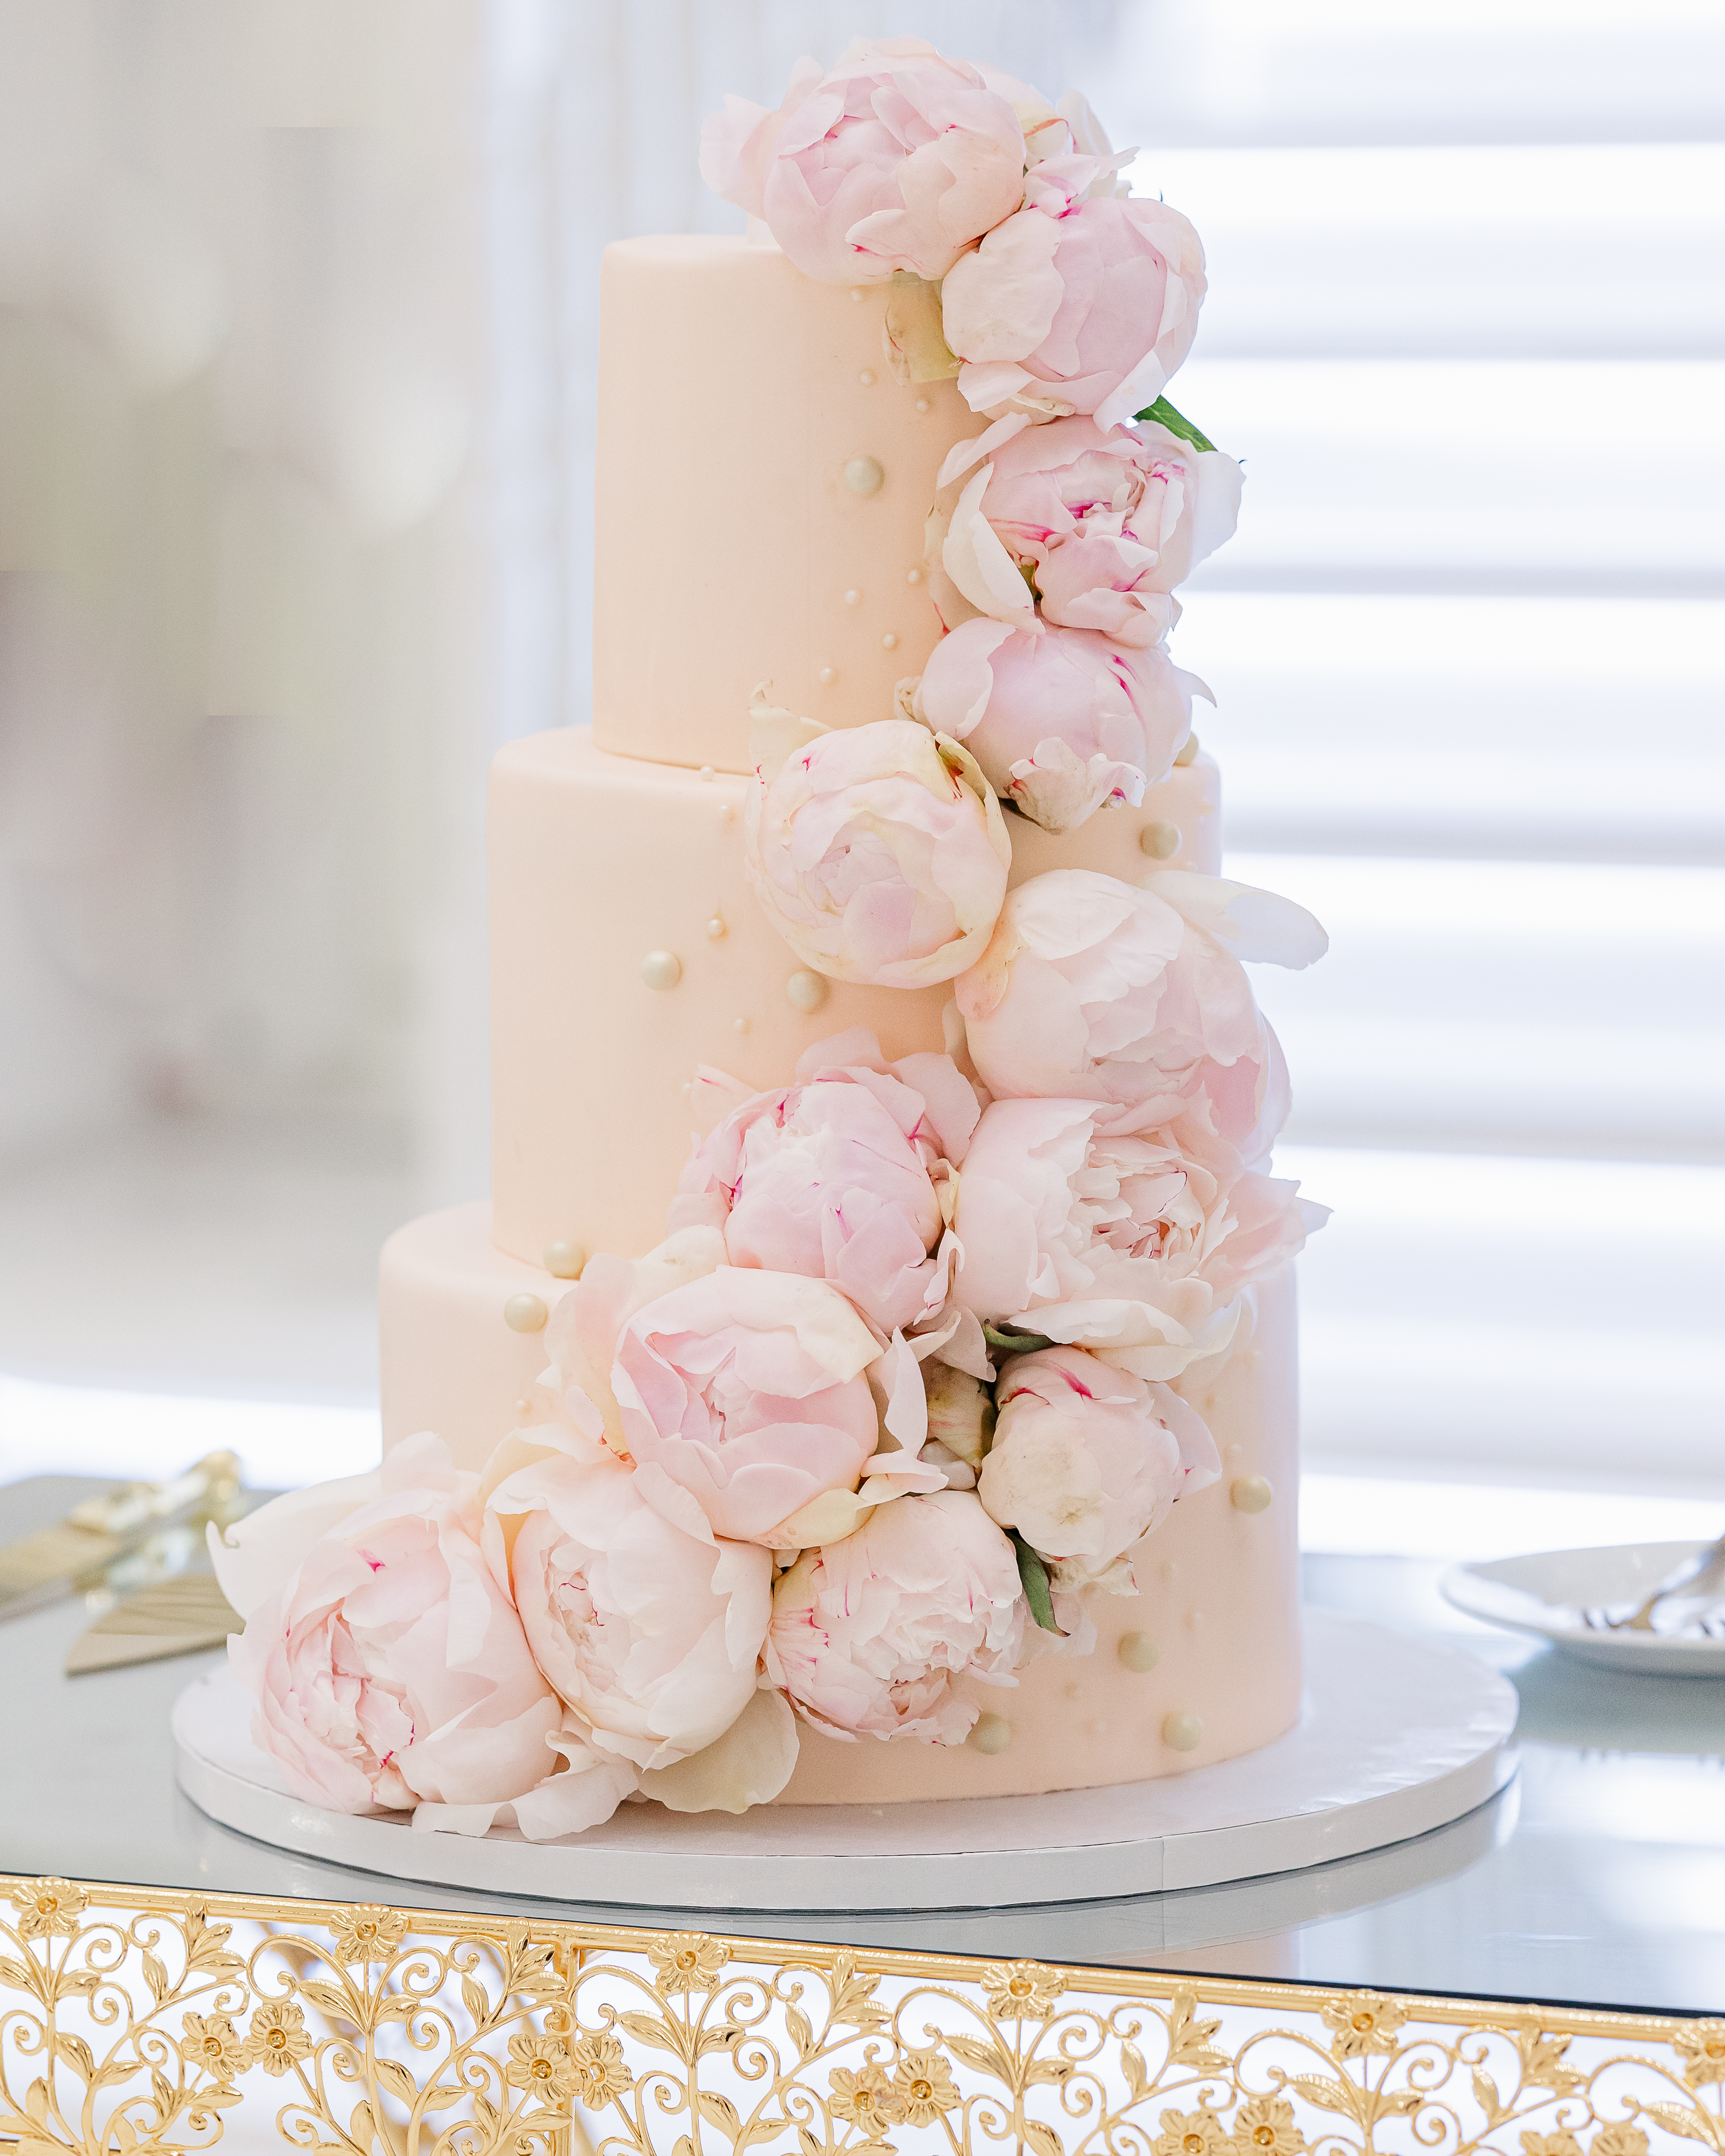 Wedding cake detail shot of a pink three tier wedding cake bedecked with peonies and gold dots